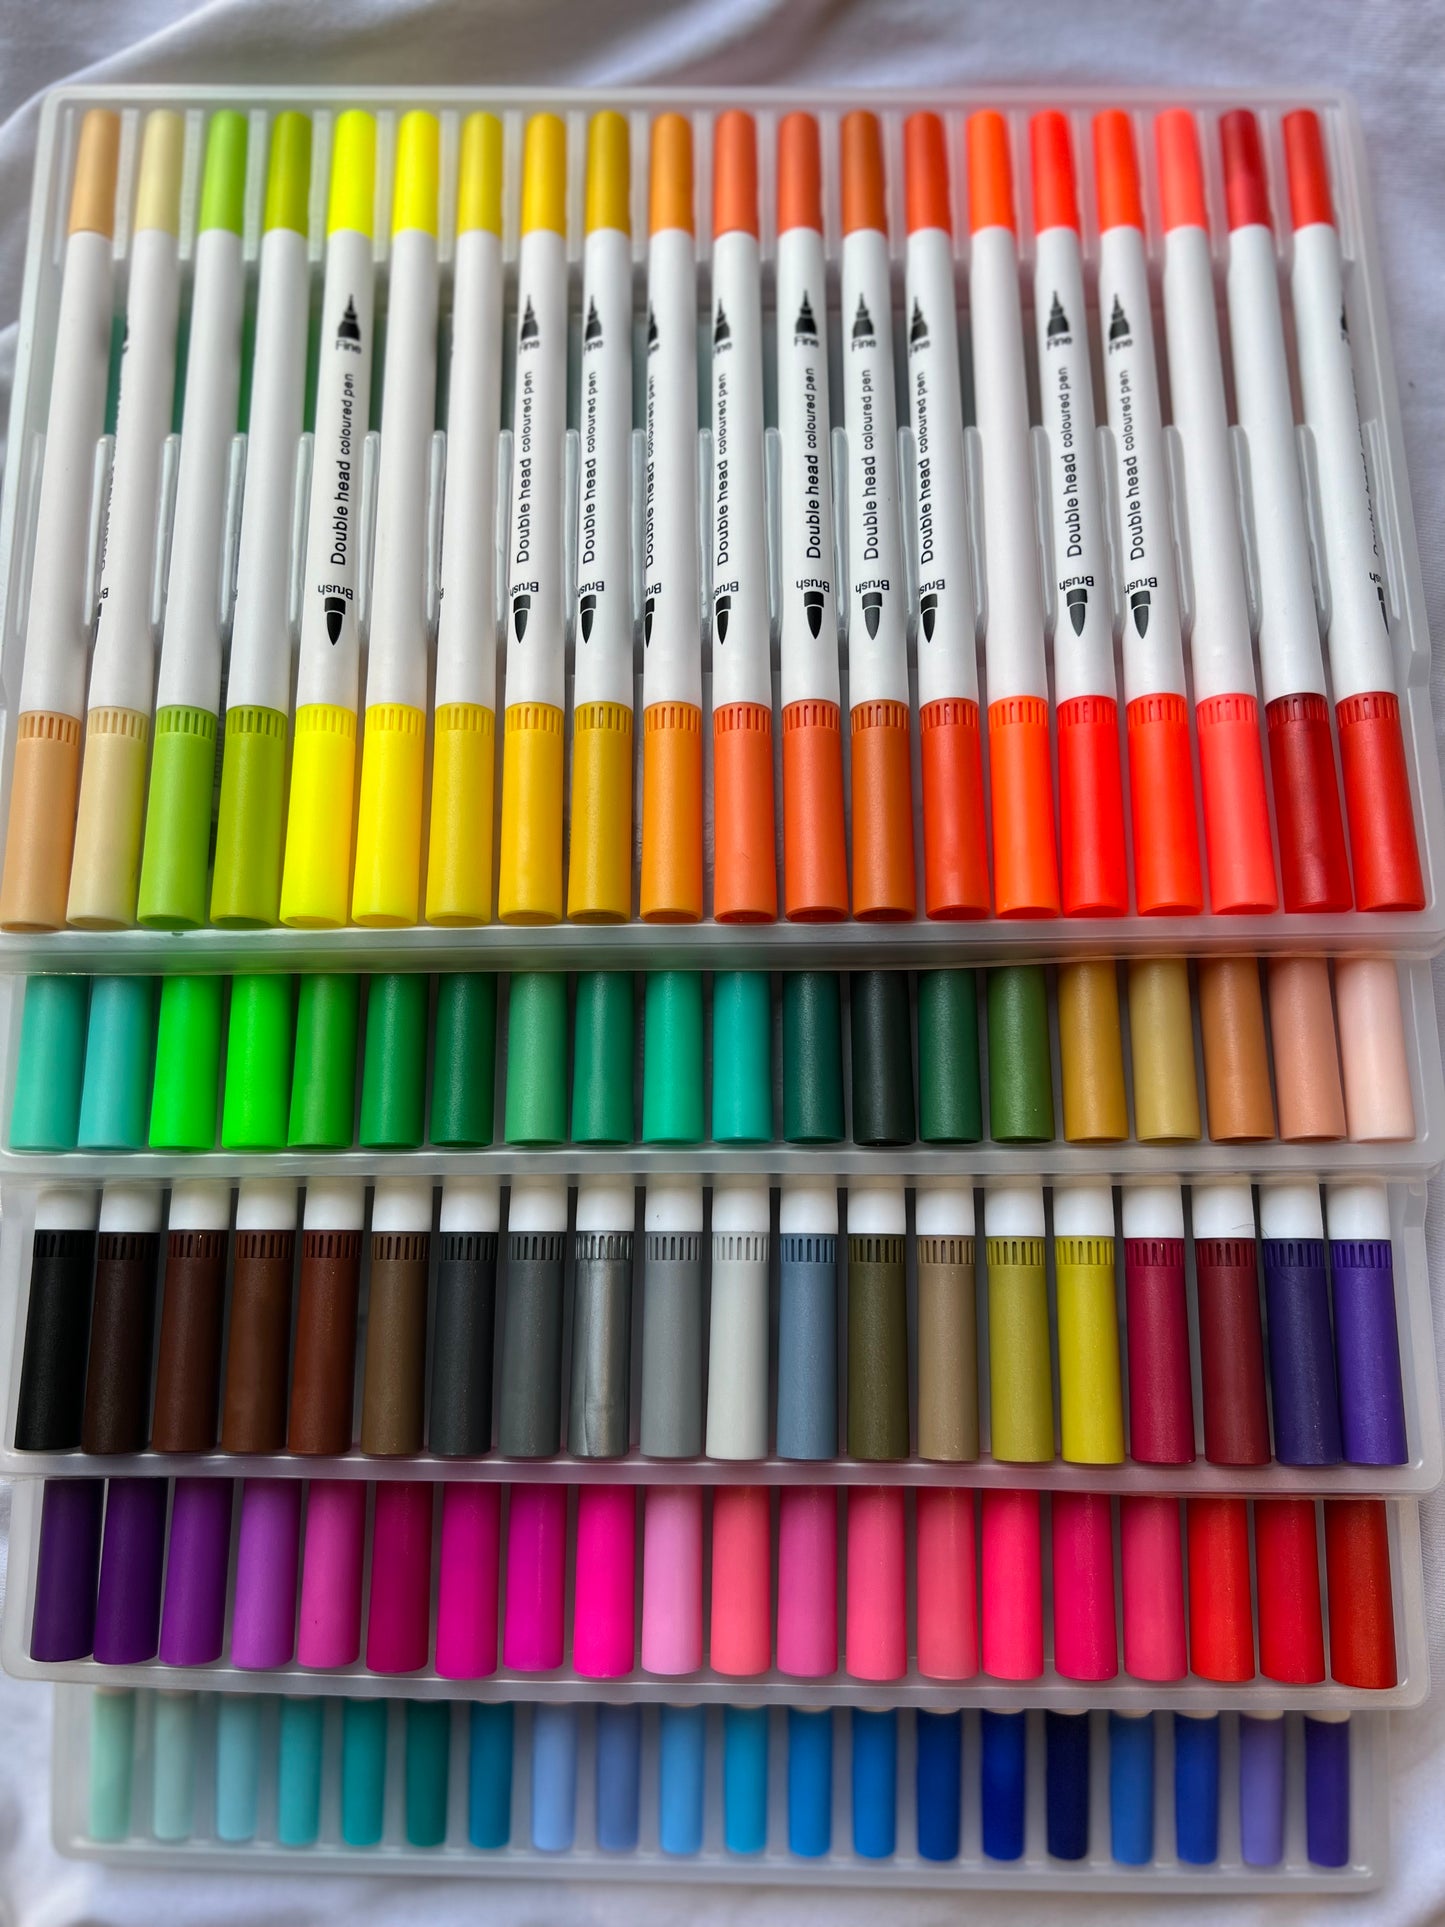 100 dual tip brush pen available in vibrant colors at point blank